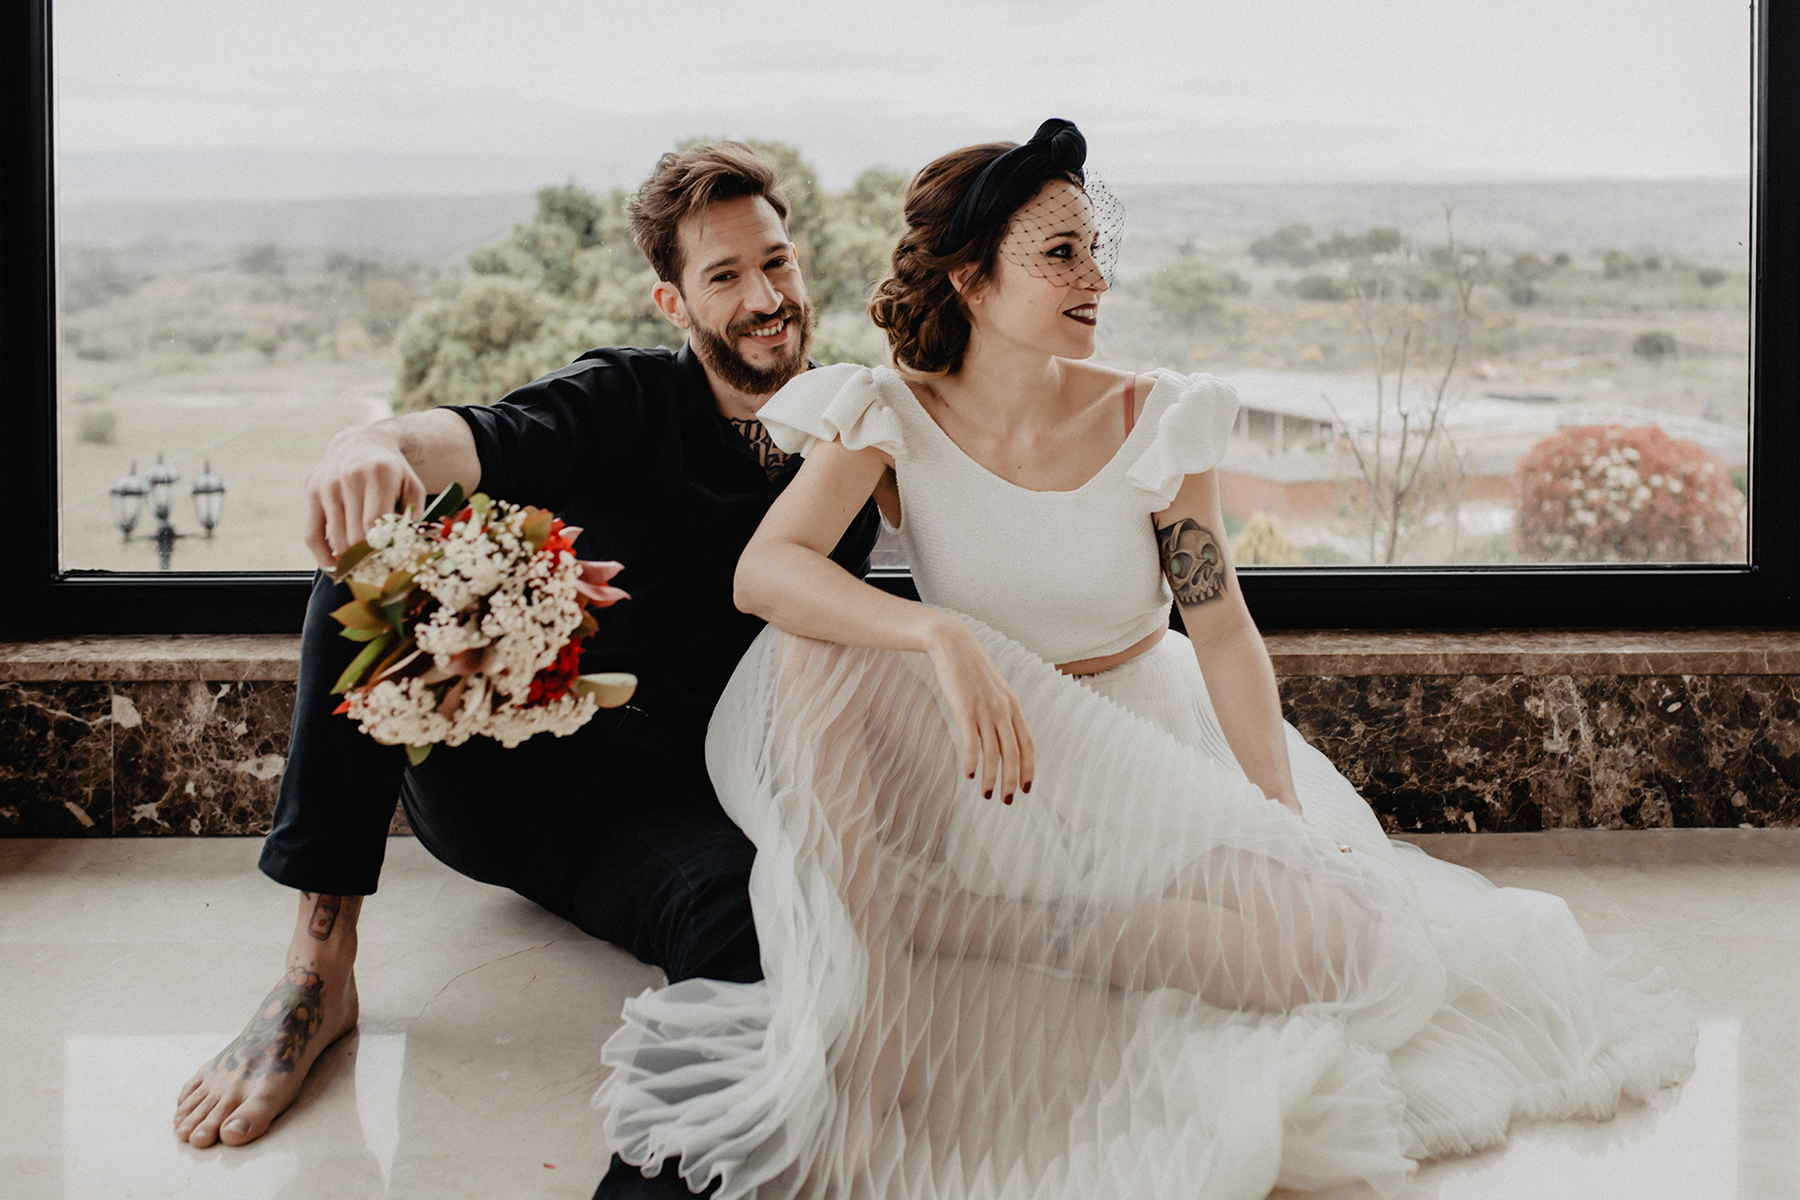 Edgy and Vibrant Elopement Inspiration in Spain